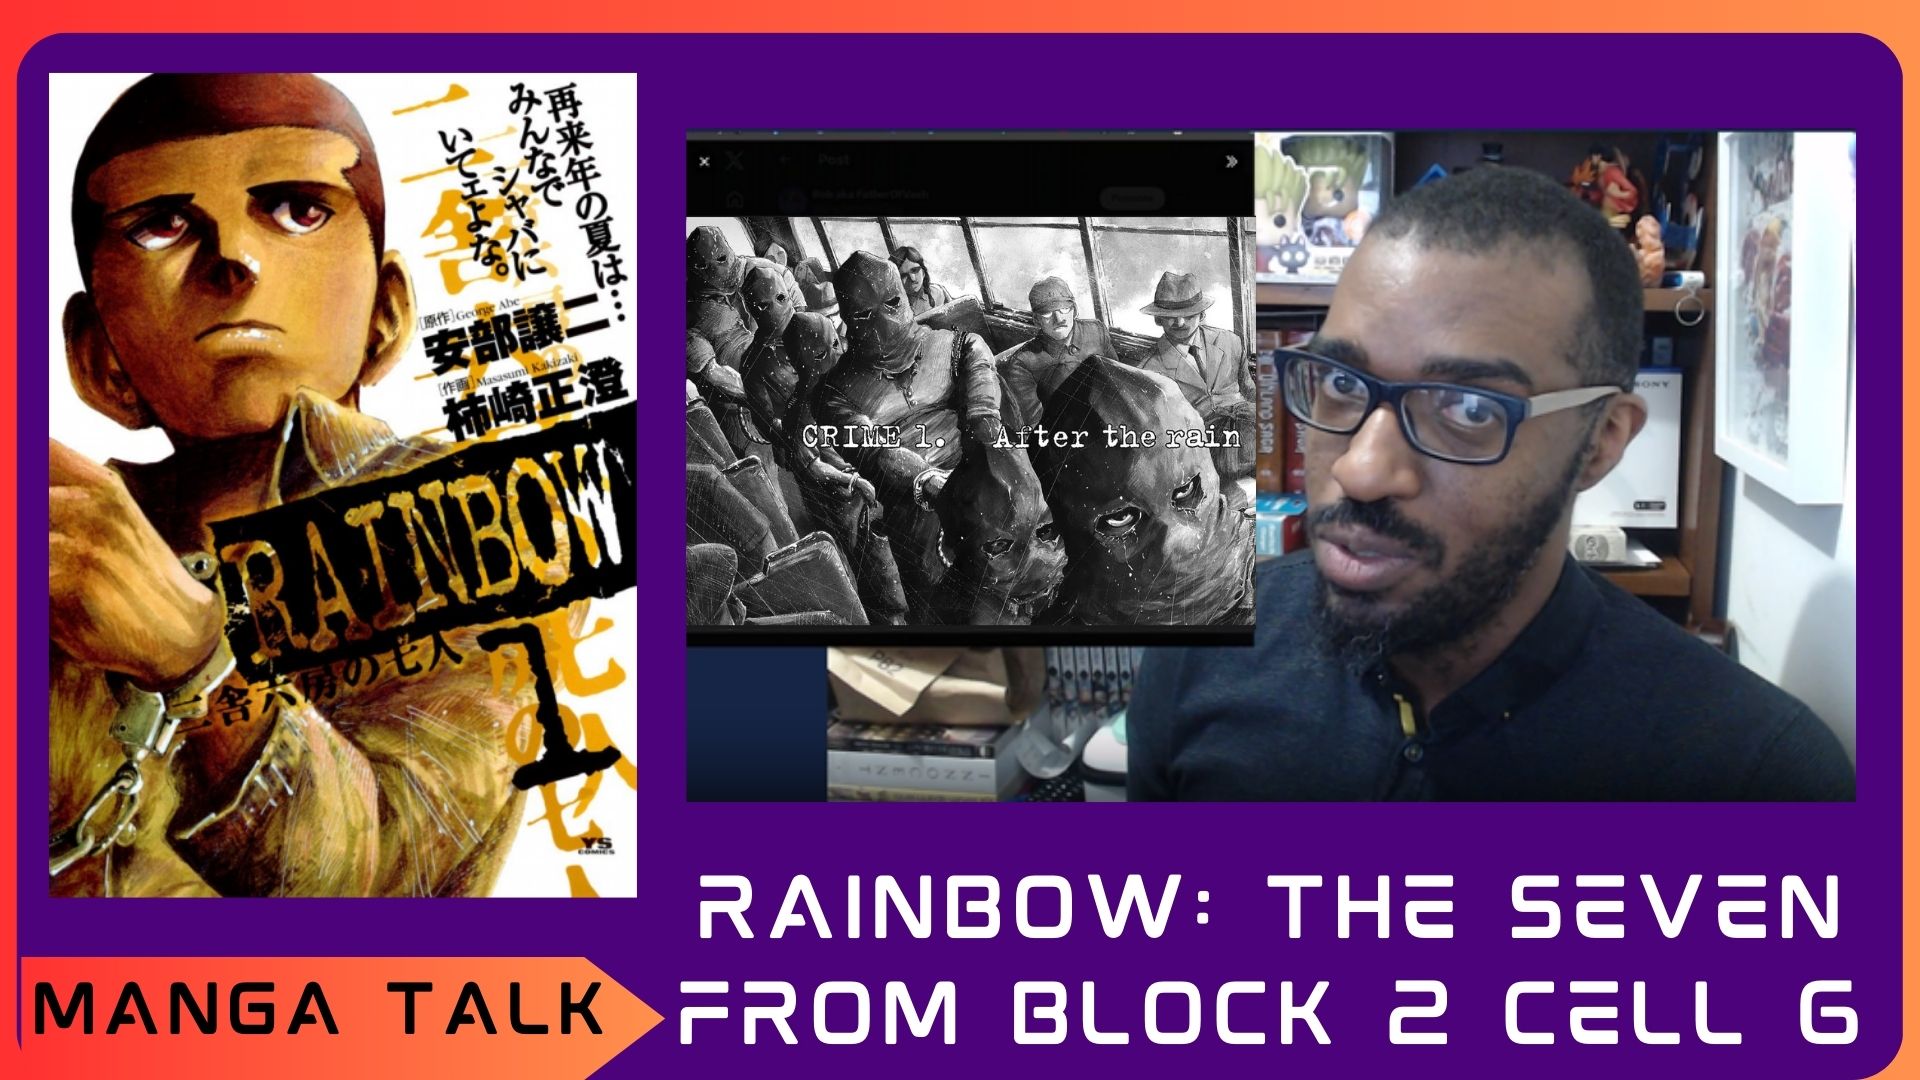 Manga Talk: Rainbow The Seven From Block 2 Cell 6 Review